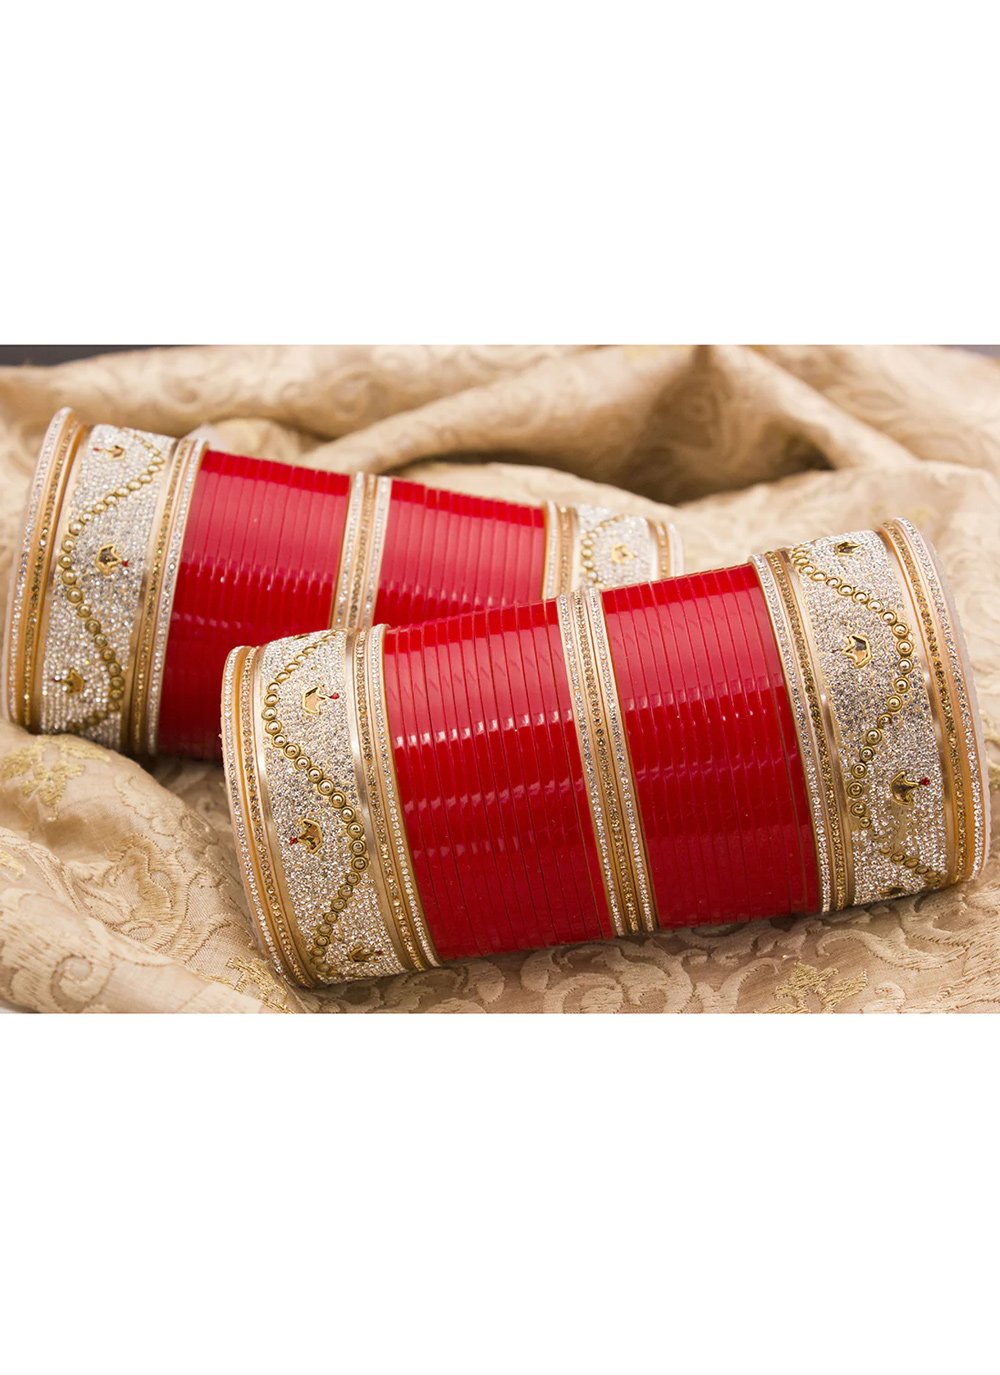 Mystic Gold Rodium Polish Stone Work Gold and Red Bangles for Bridal